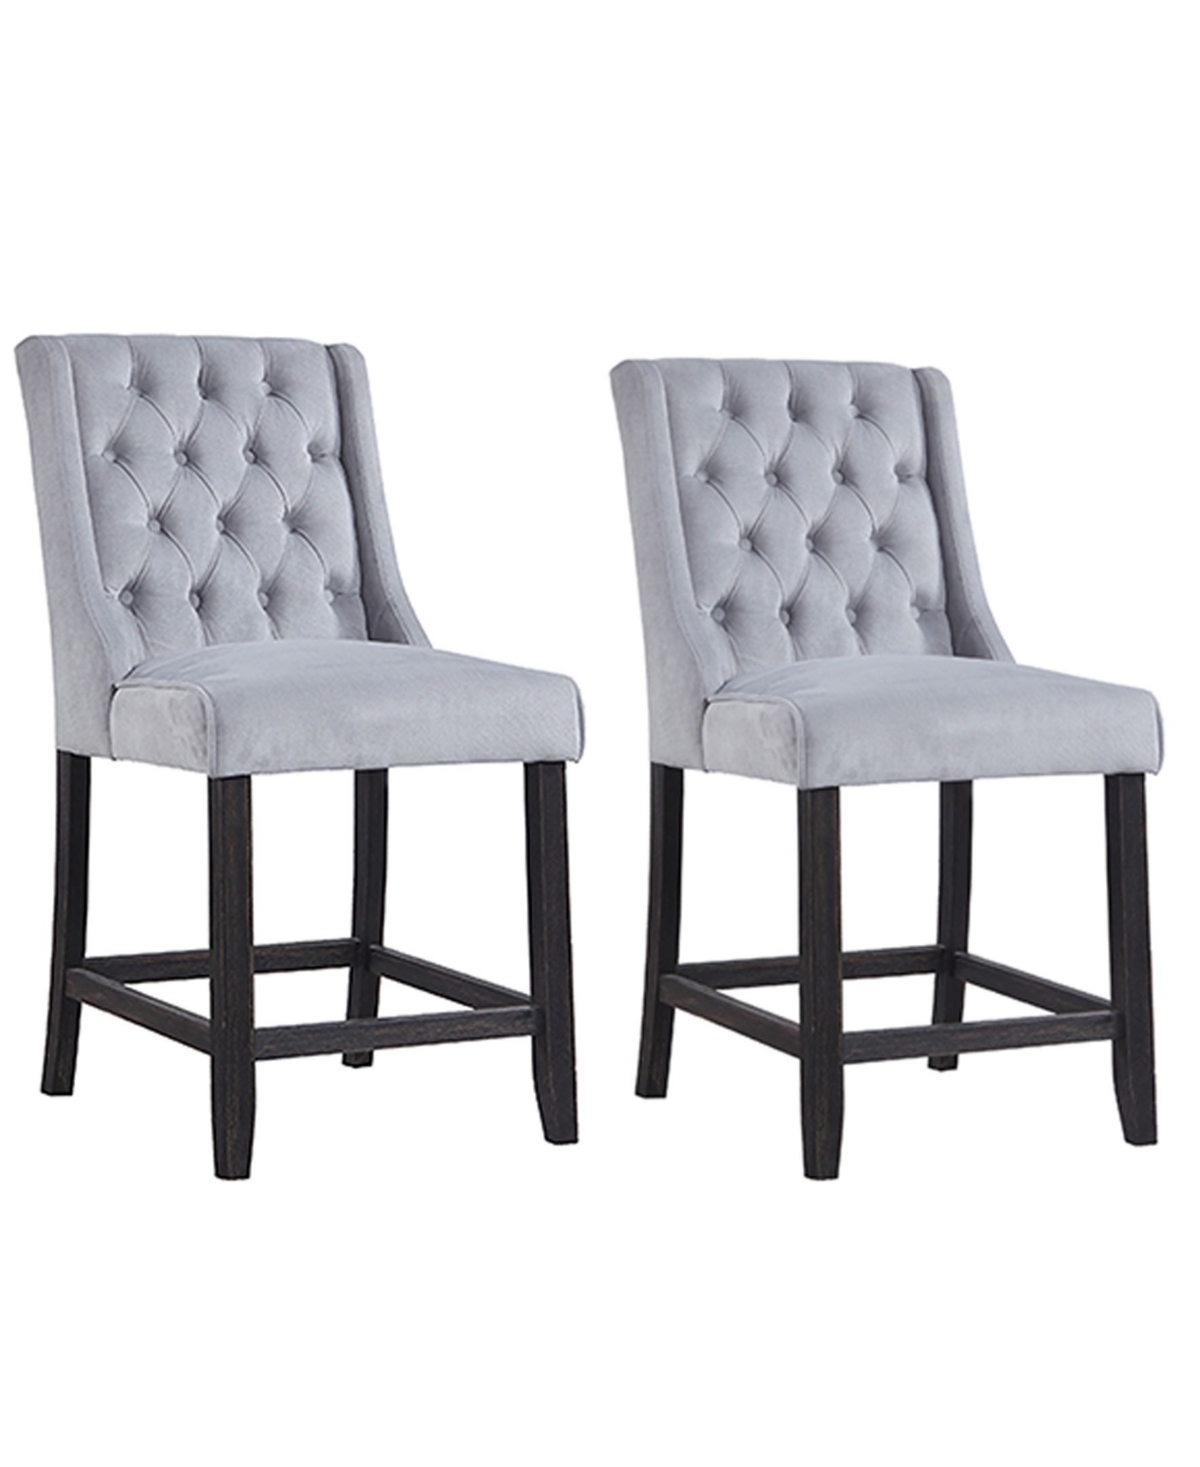 Best Master Furniture Newport Upholstered Bar Chairs With Tufted Back, Set Of 2 In Gray